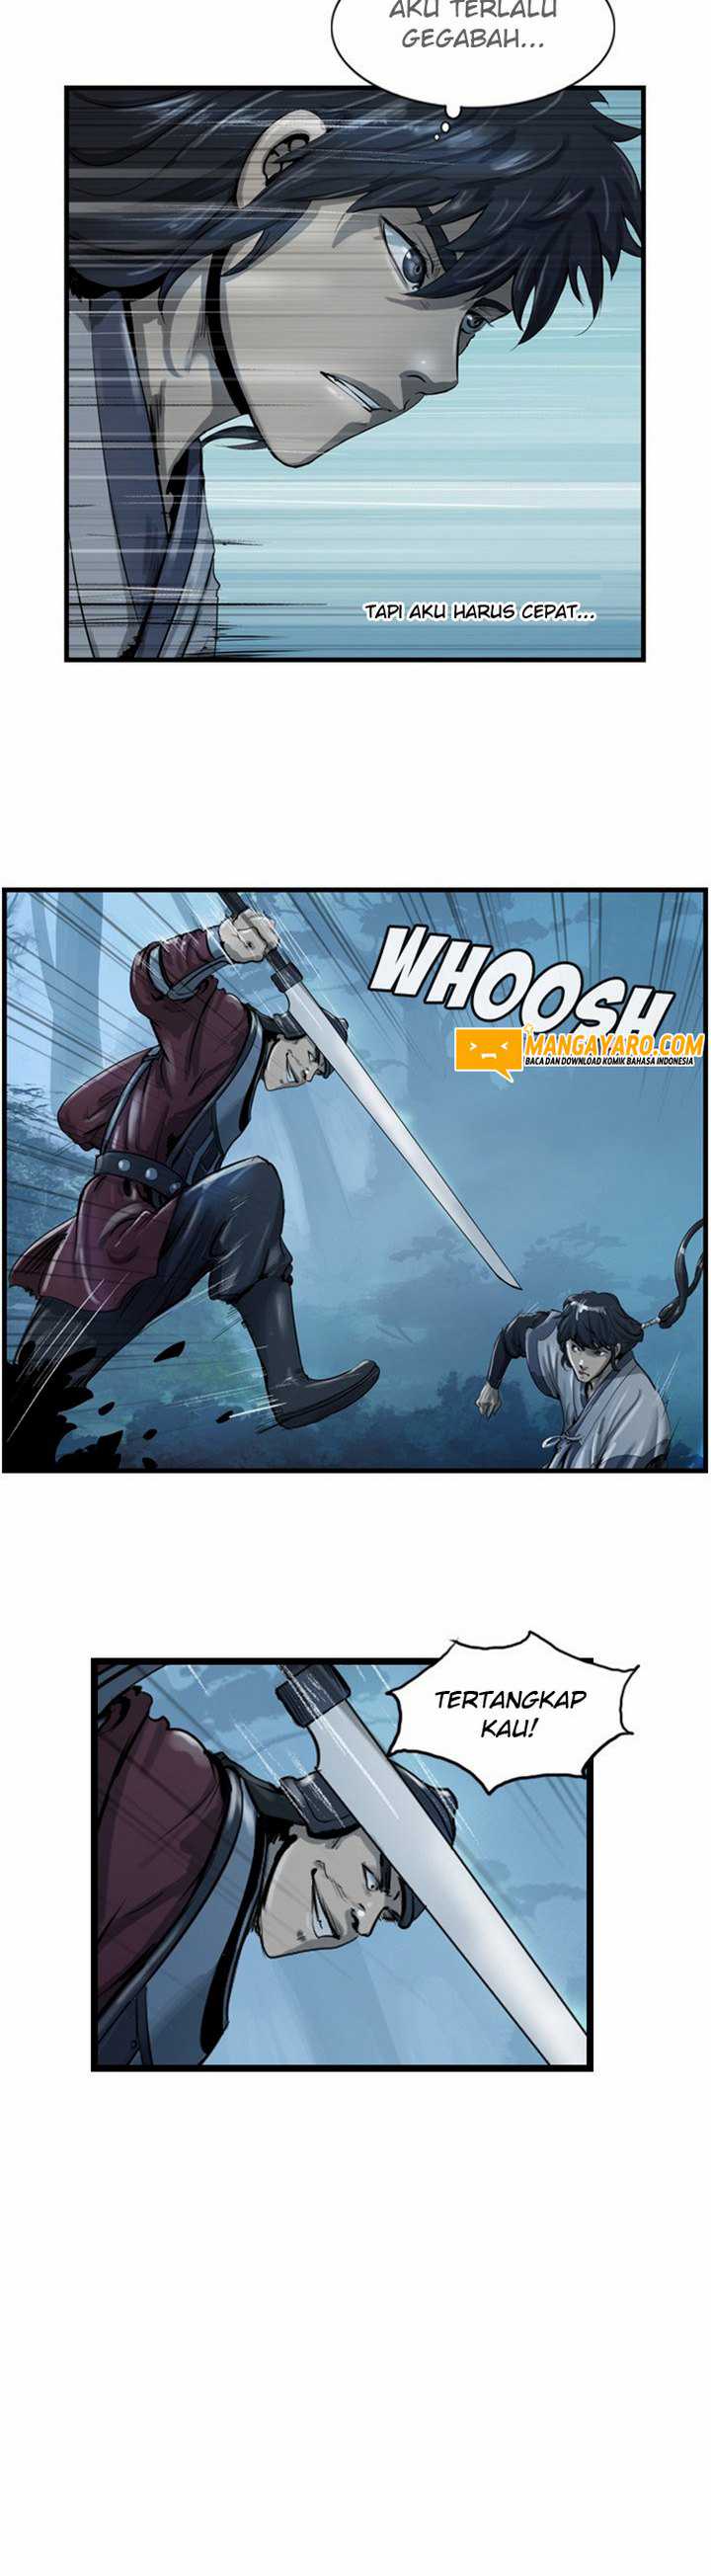 The Wanderer Chapter 21.1 bahasa indonesia